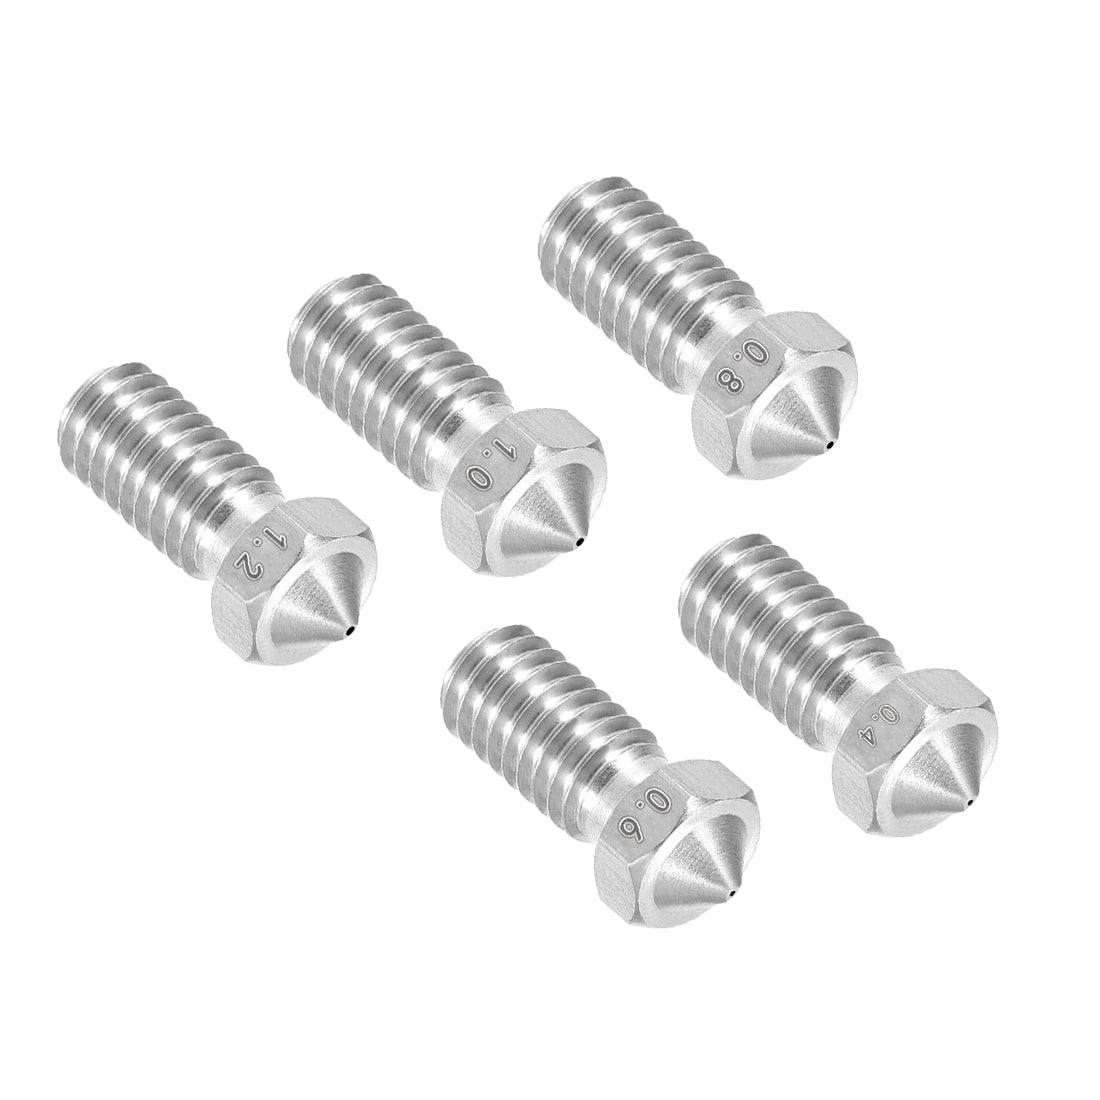 uxcell Uxcell 3D Printer Nozzle Fit for V6,for 1.75mm Filament Stainless Steel,0.4mm - 1.2mm Total 5pcs